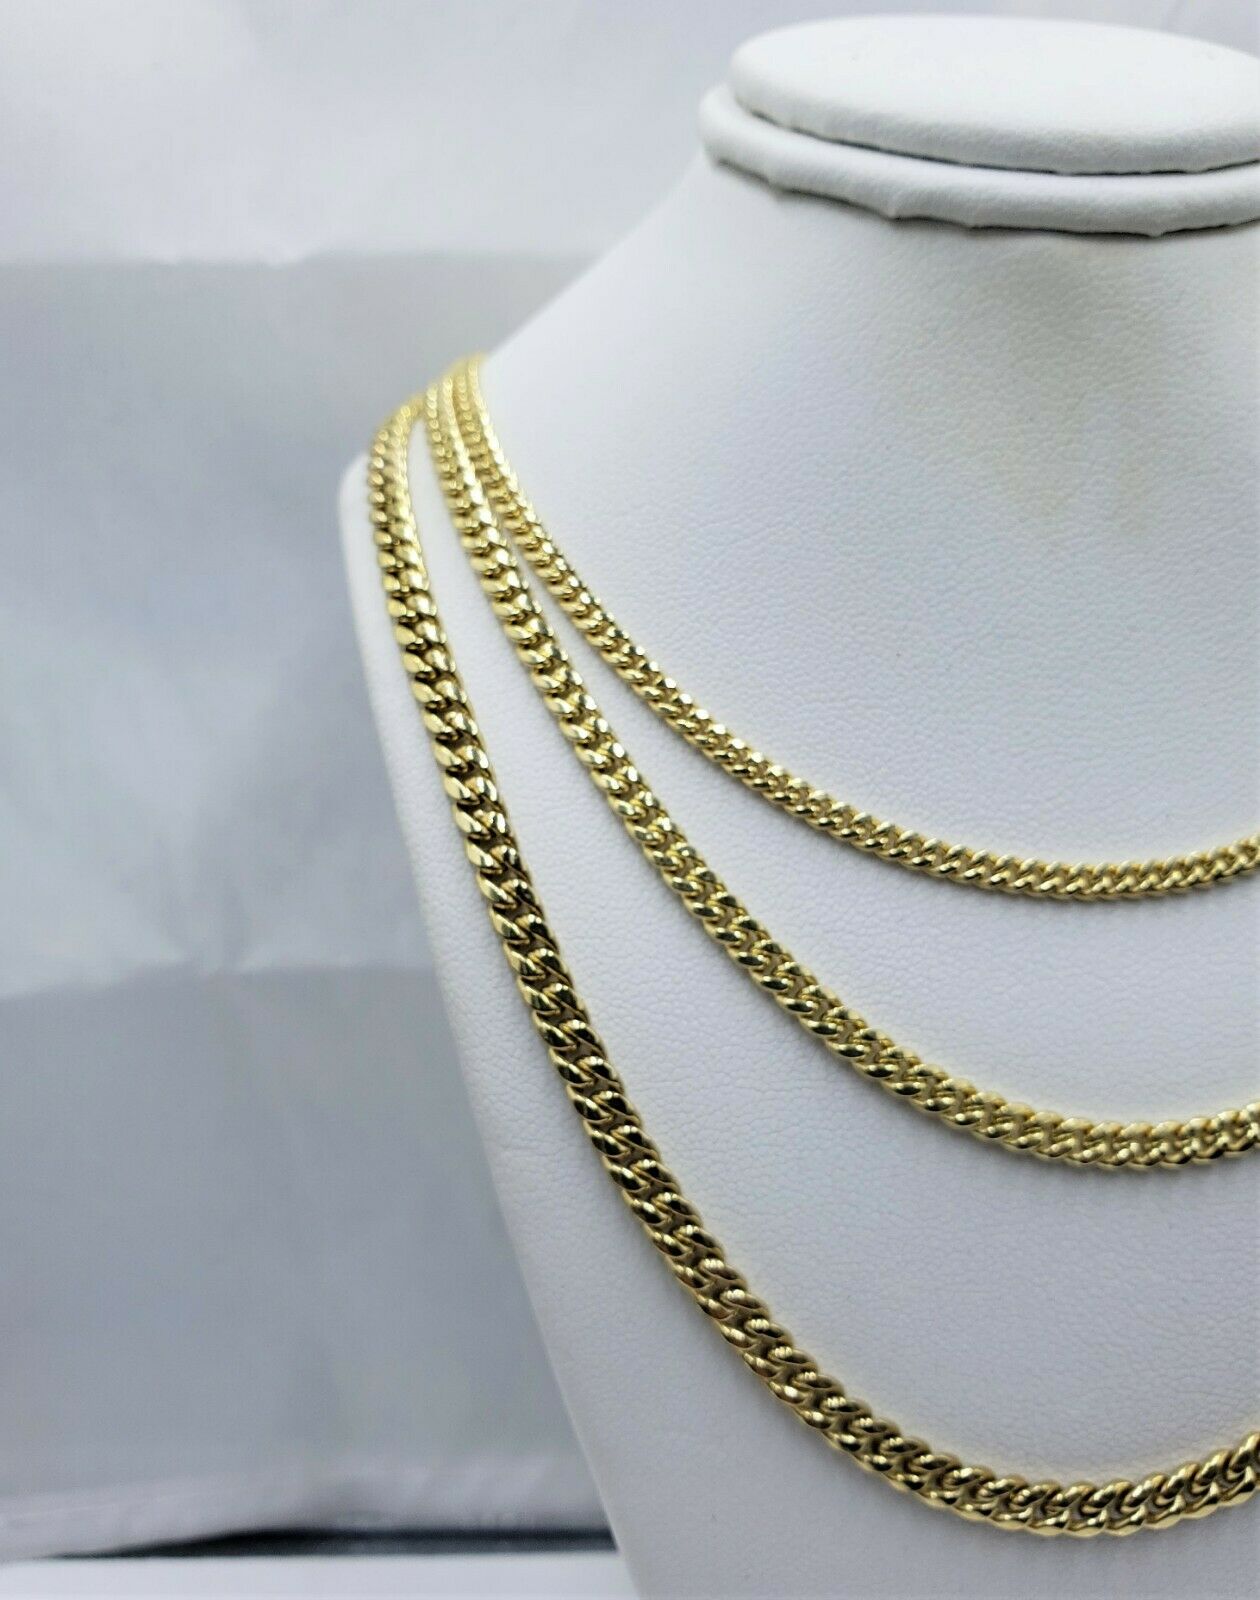 SOLID 14K Yellow Gold Chain Miami Cuban Necklace Men Women 22 24 26 28 Inch,Rope